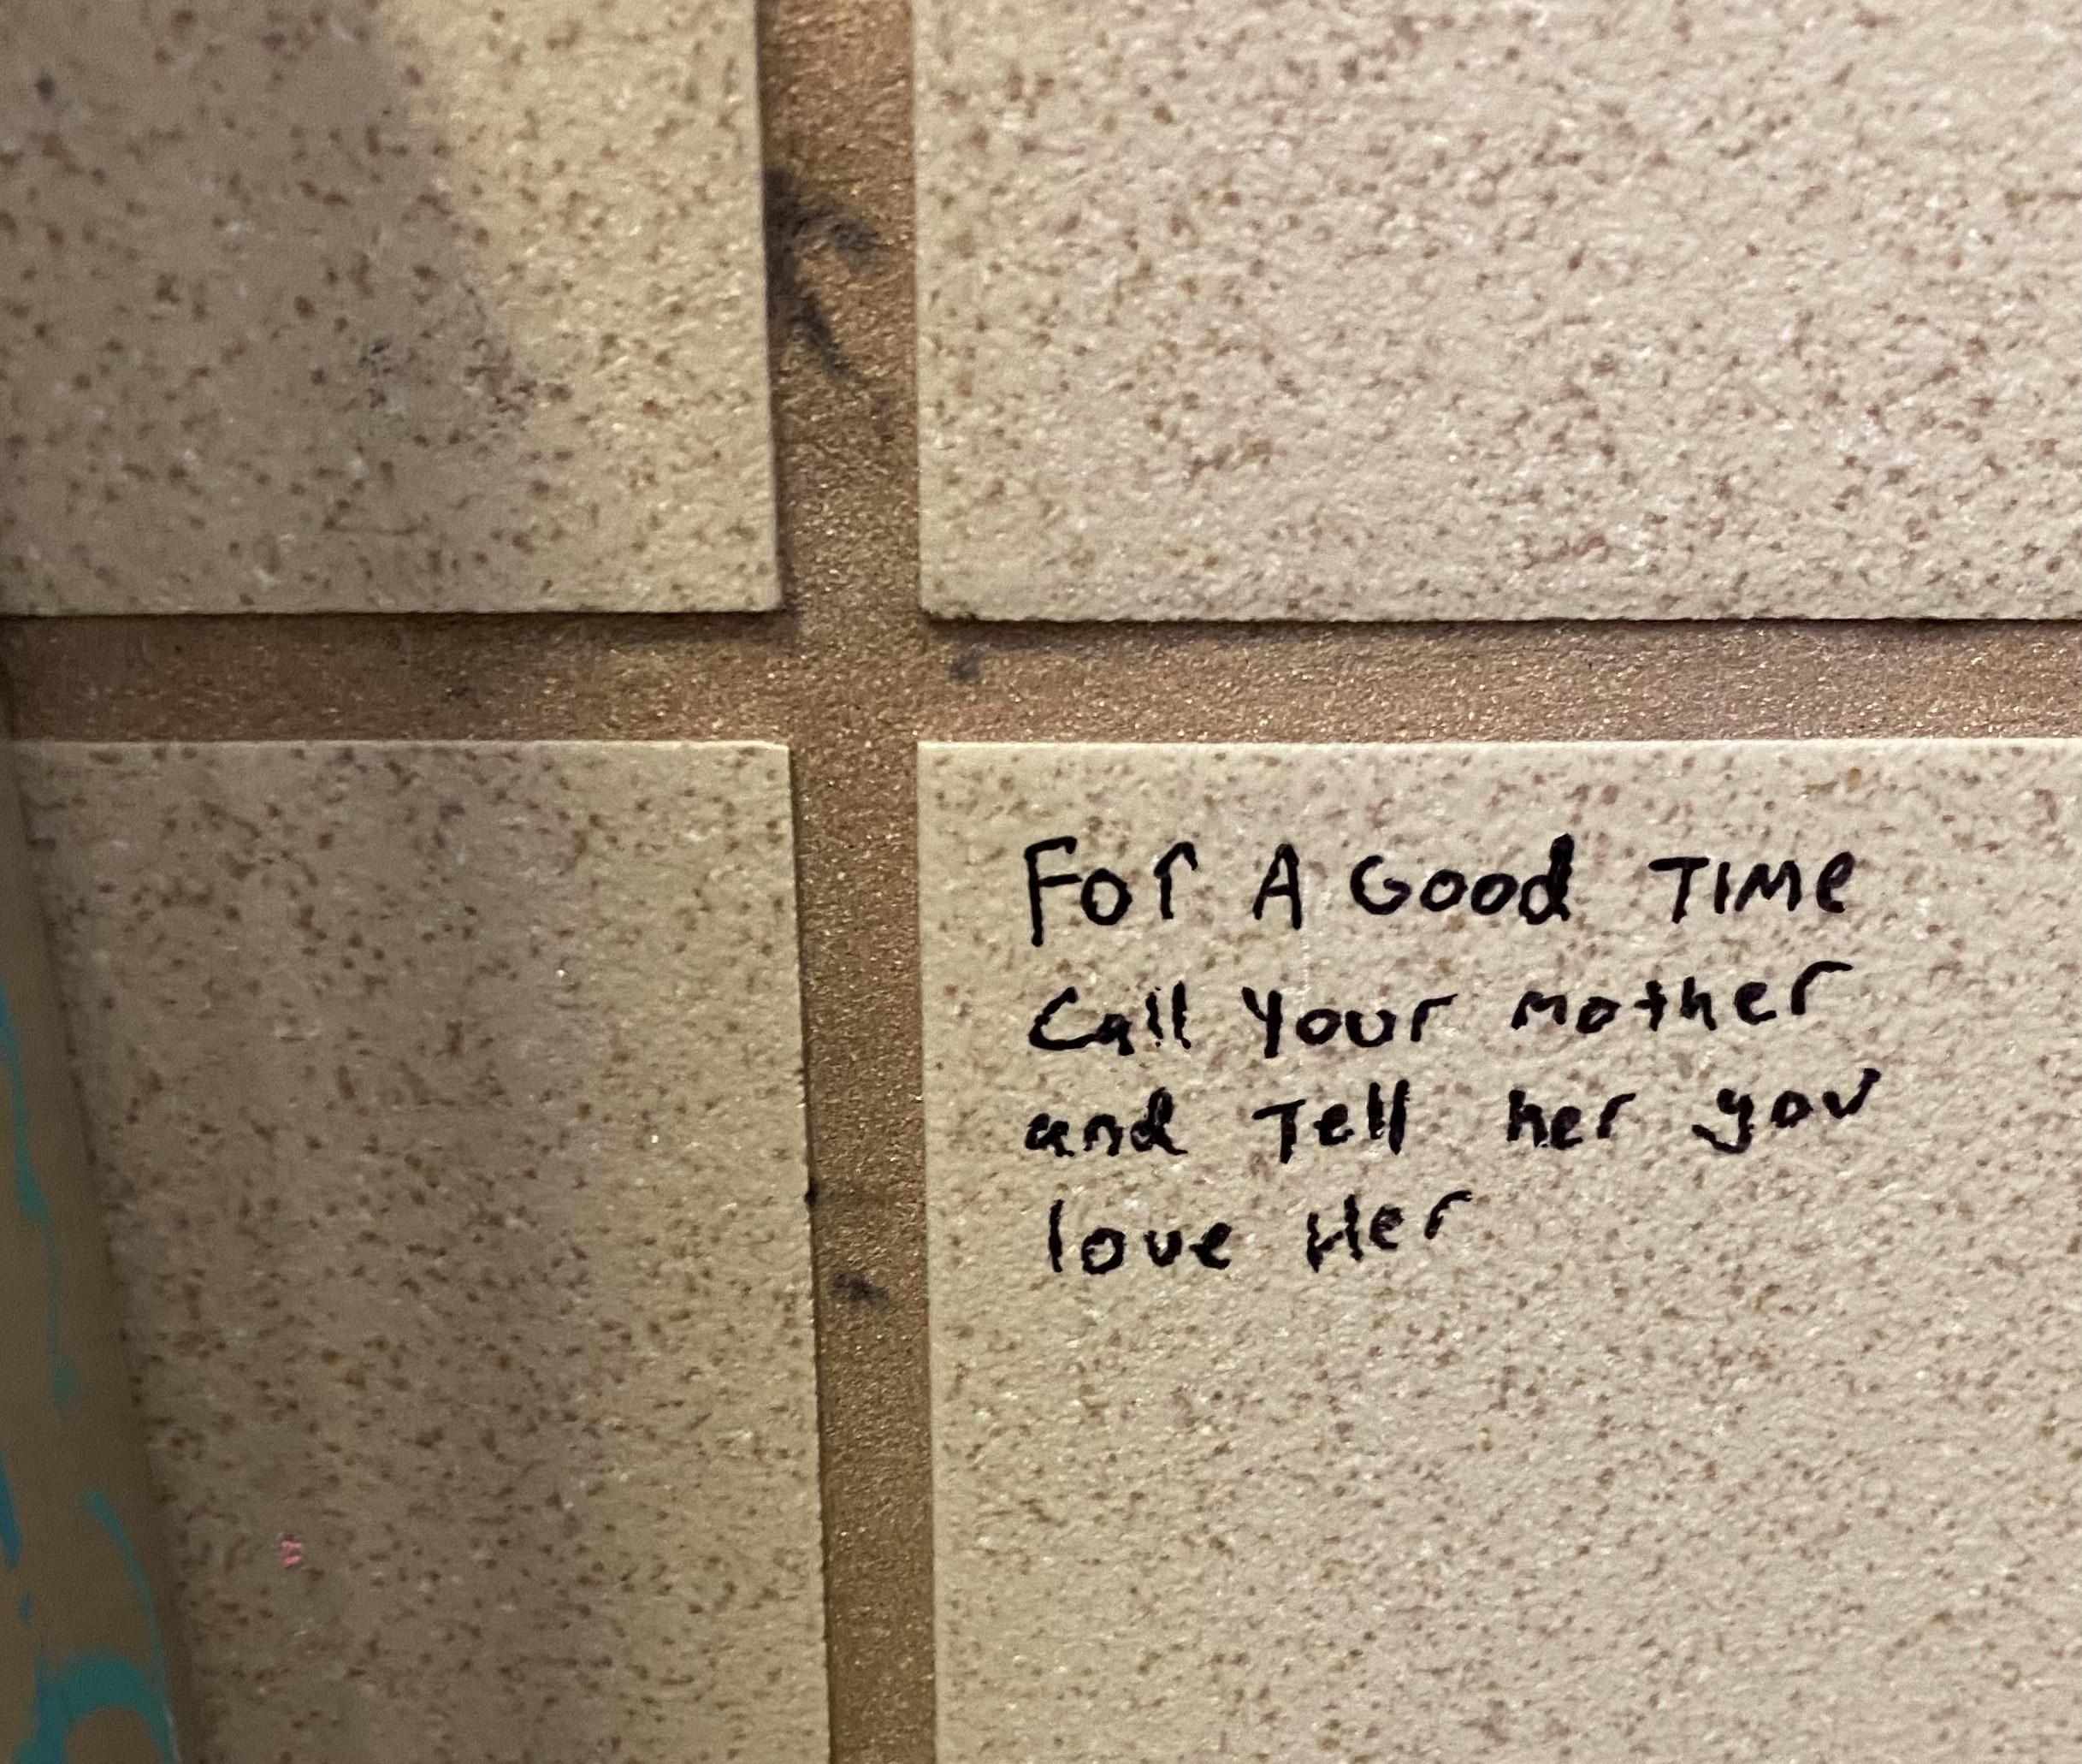 Found in a rest area bathroom stall along I-5. More uplifting than your average bathroom graffiti.